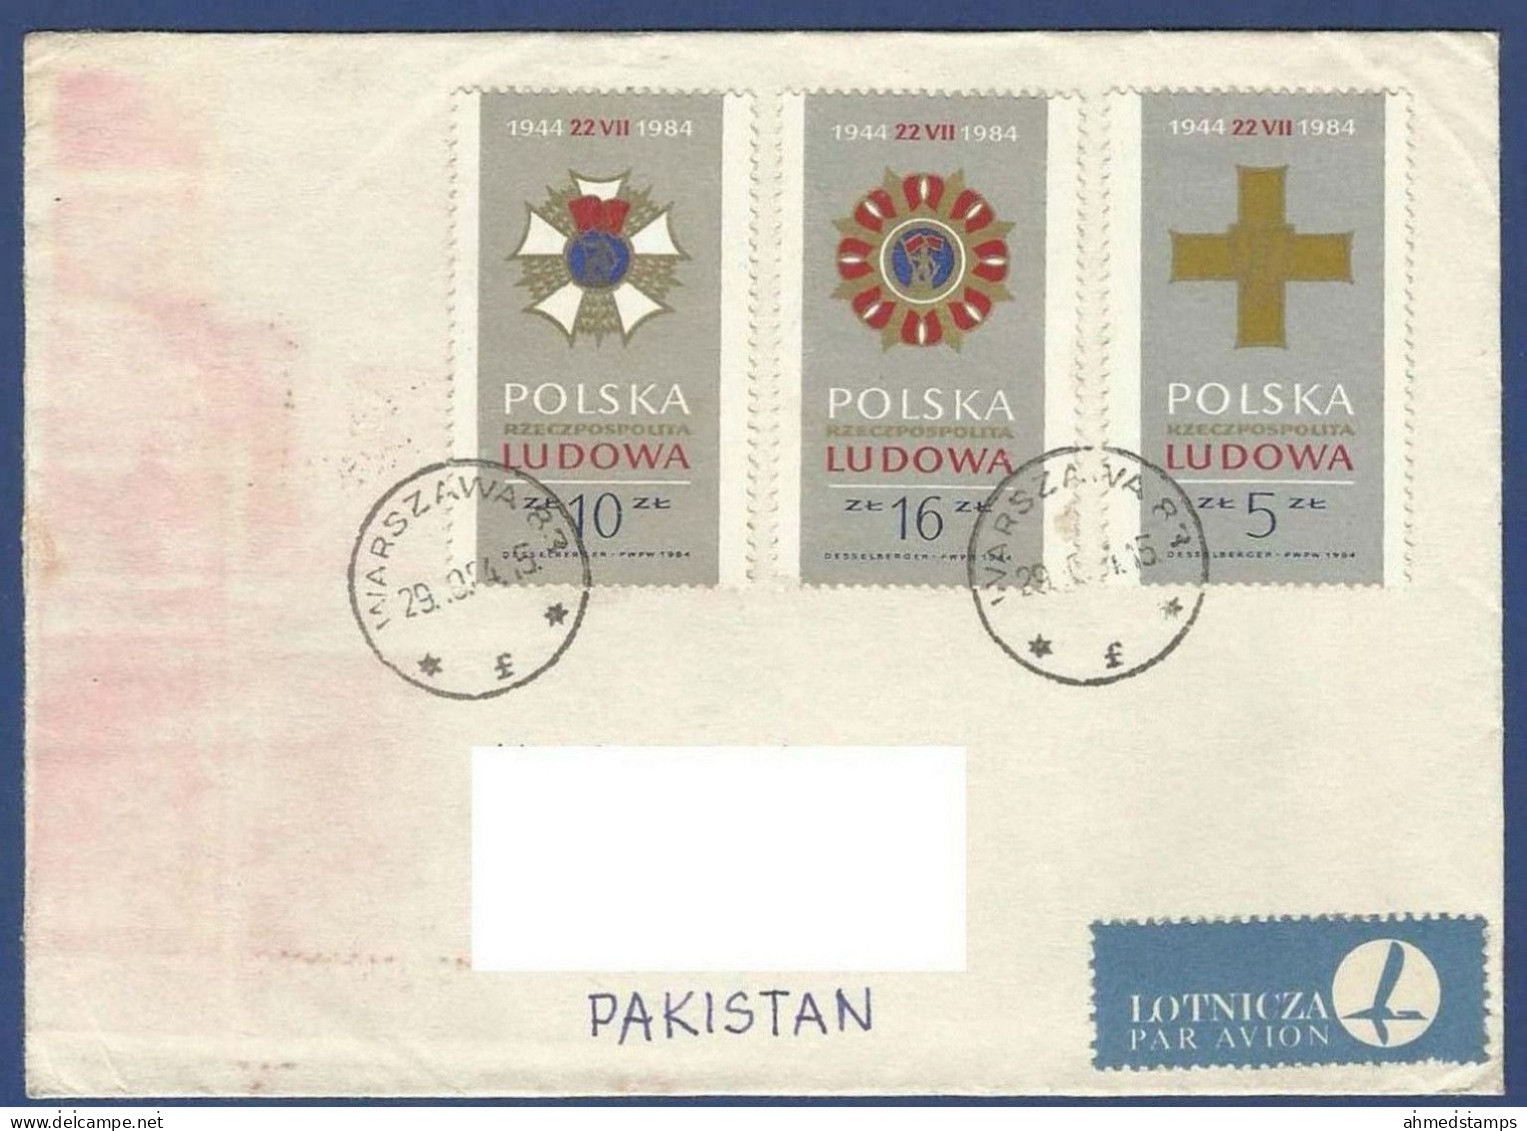 POLAND POSTAL USED AIRMAIL COVER TO PAKISTAN - Unclassified